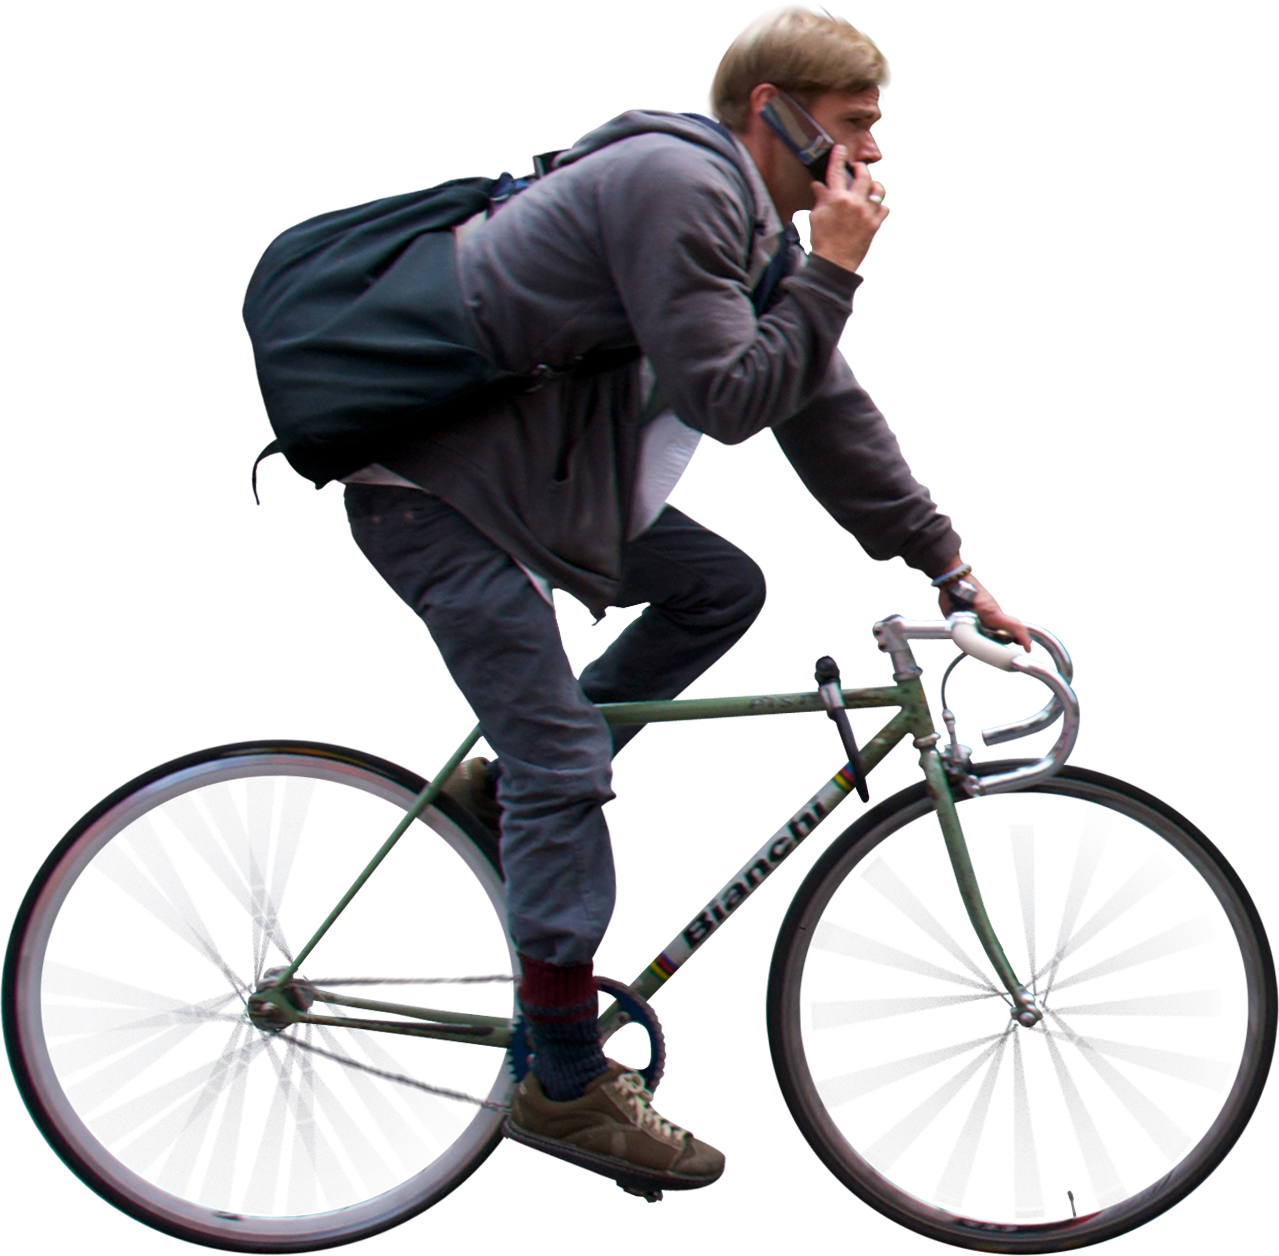 A Man On A Bicycle Talking On A Phone